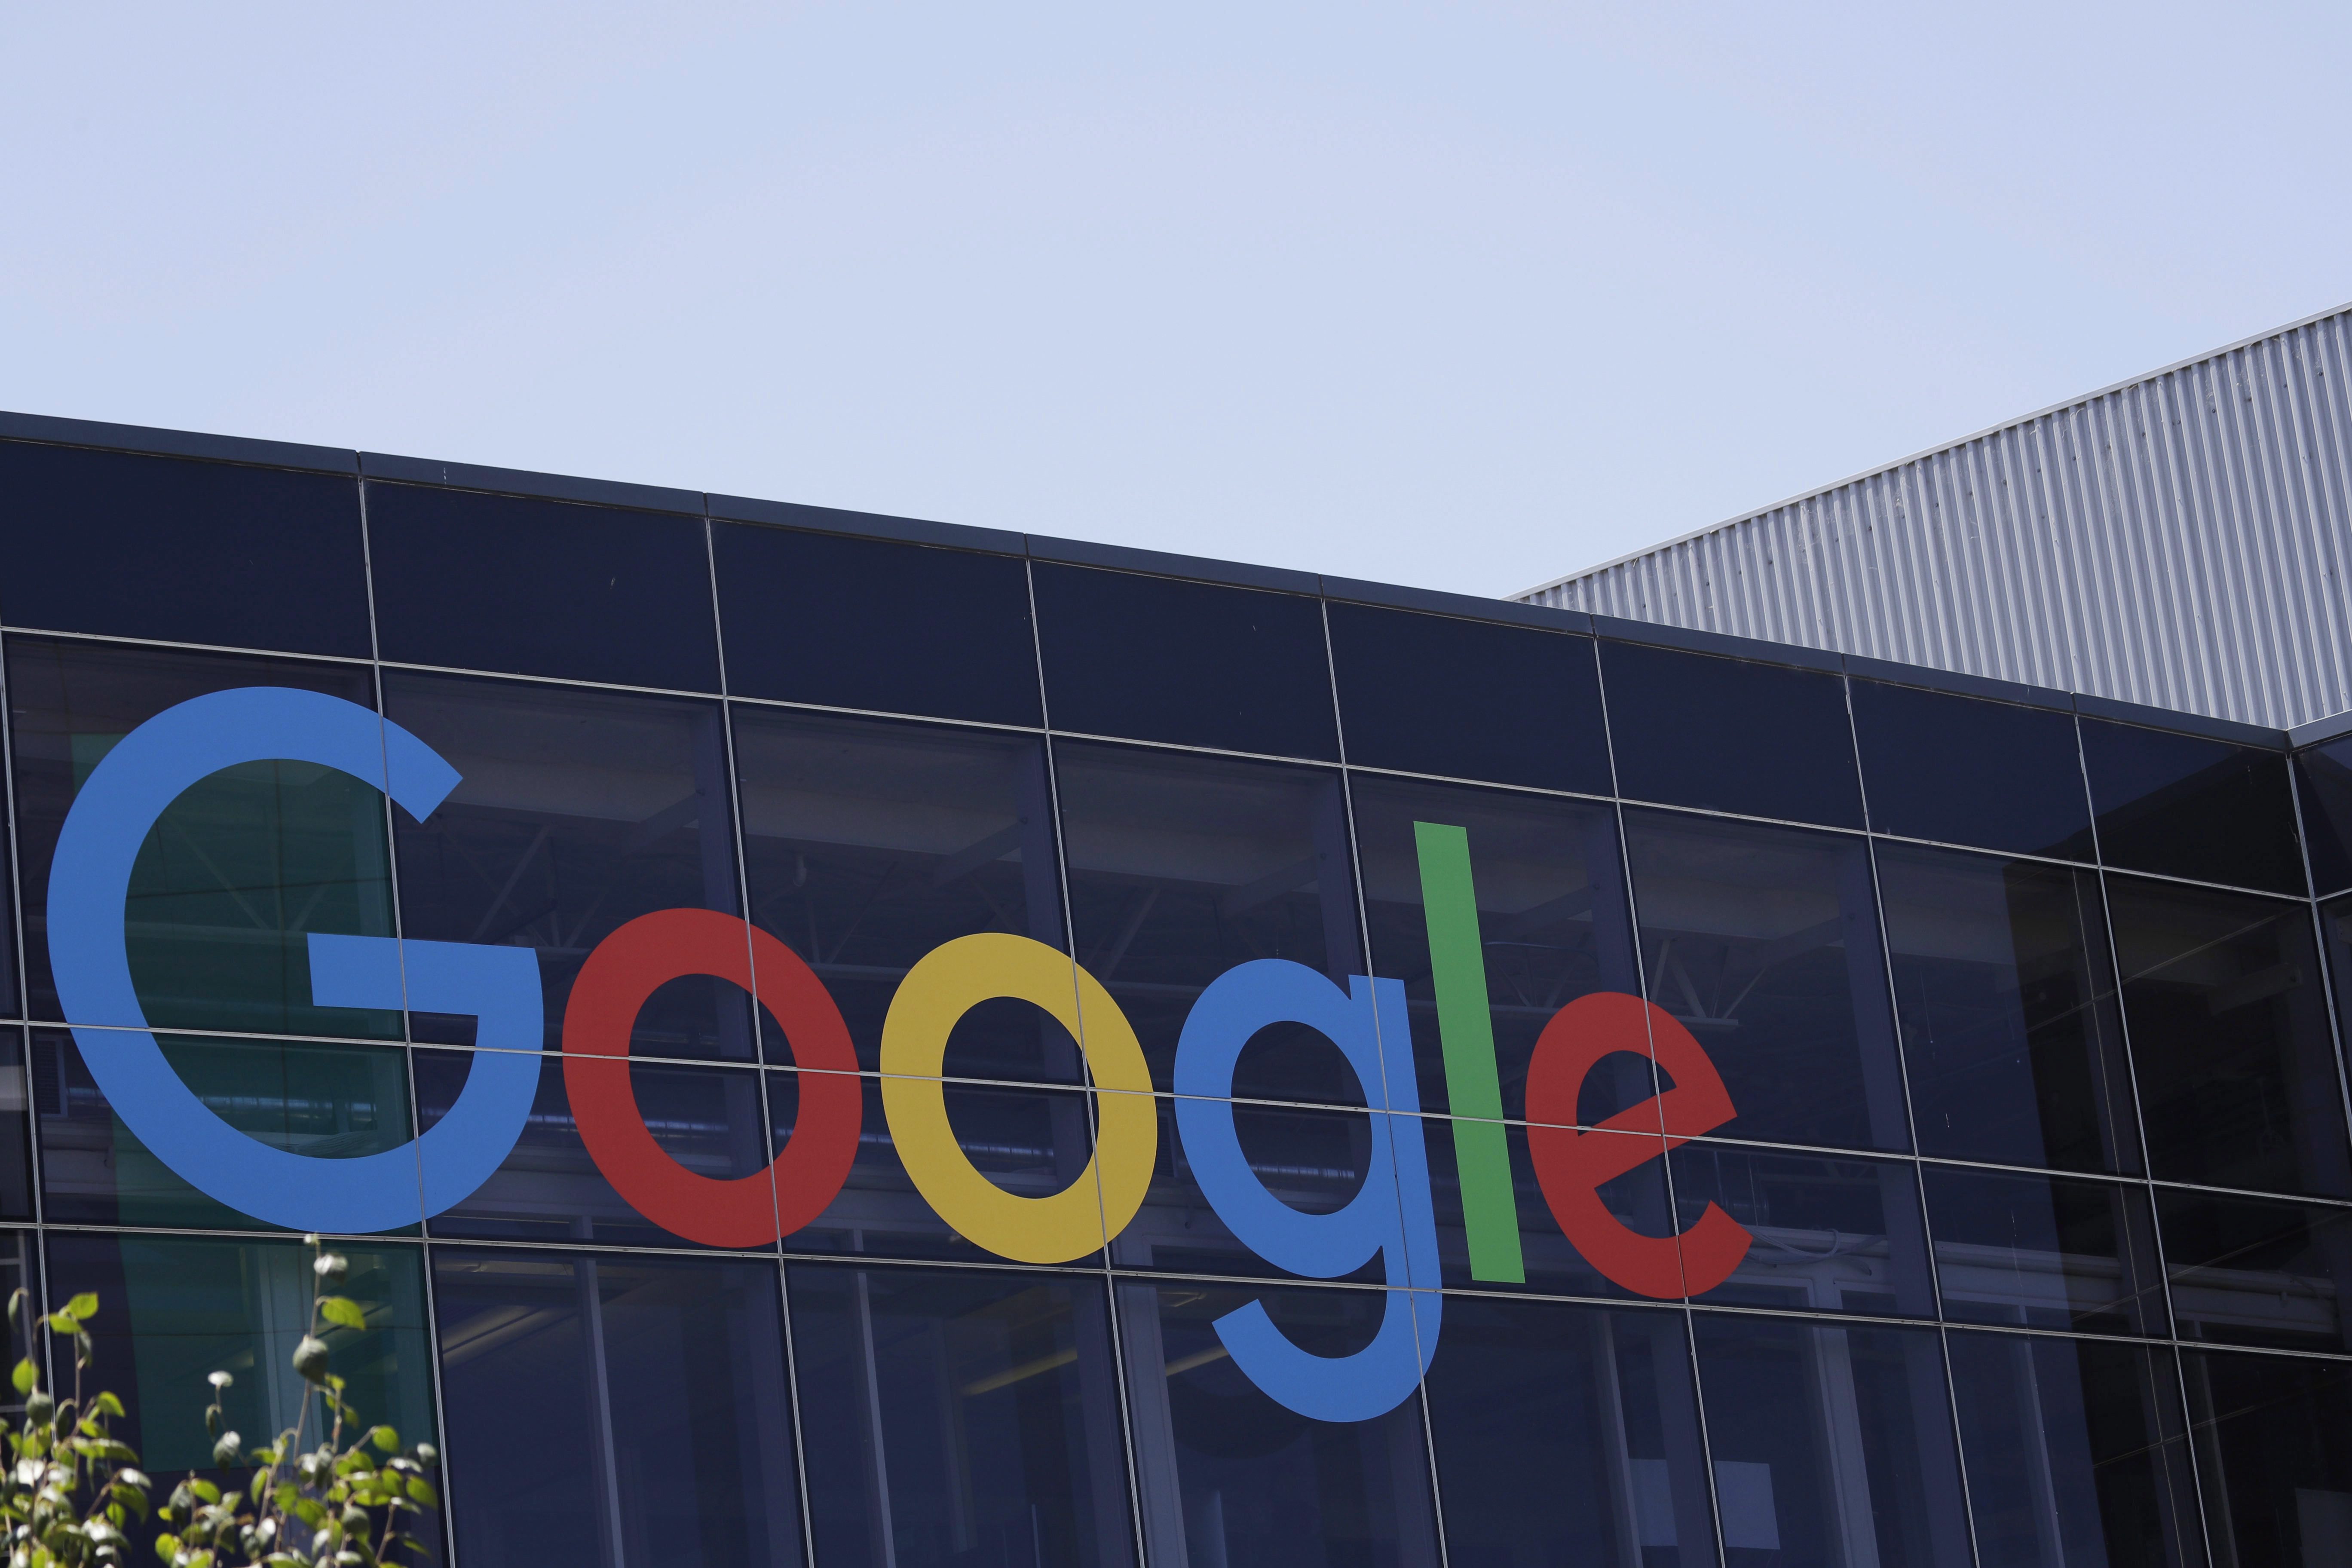 Google sued for 'hiring discrimination' against white, Asian males